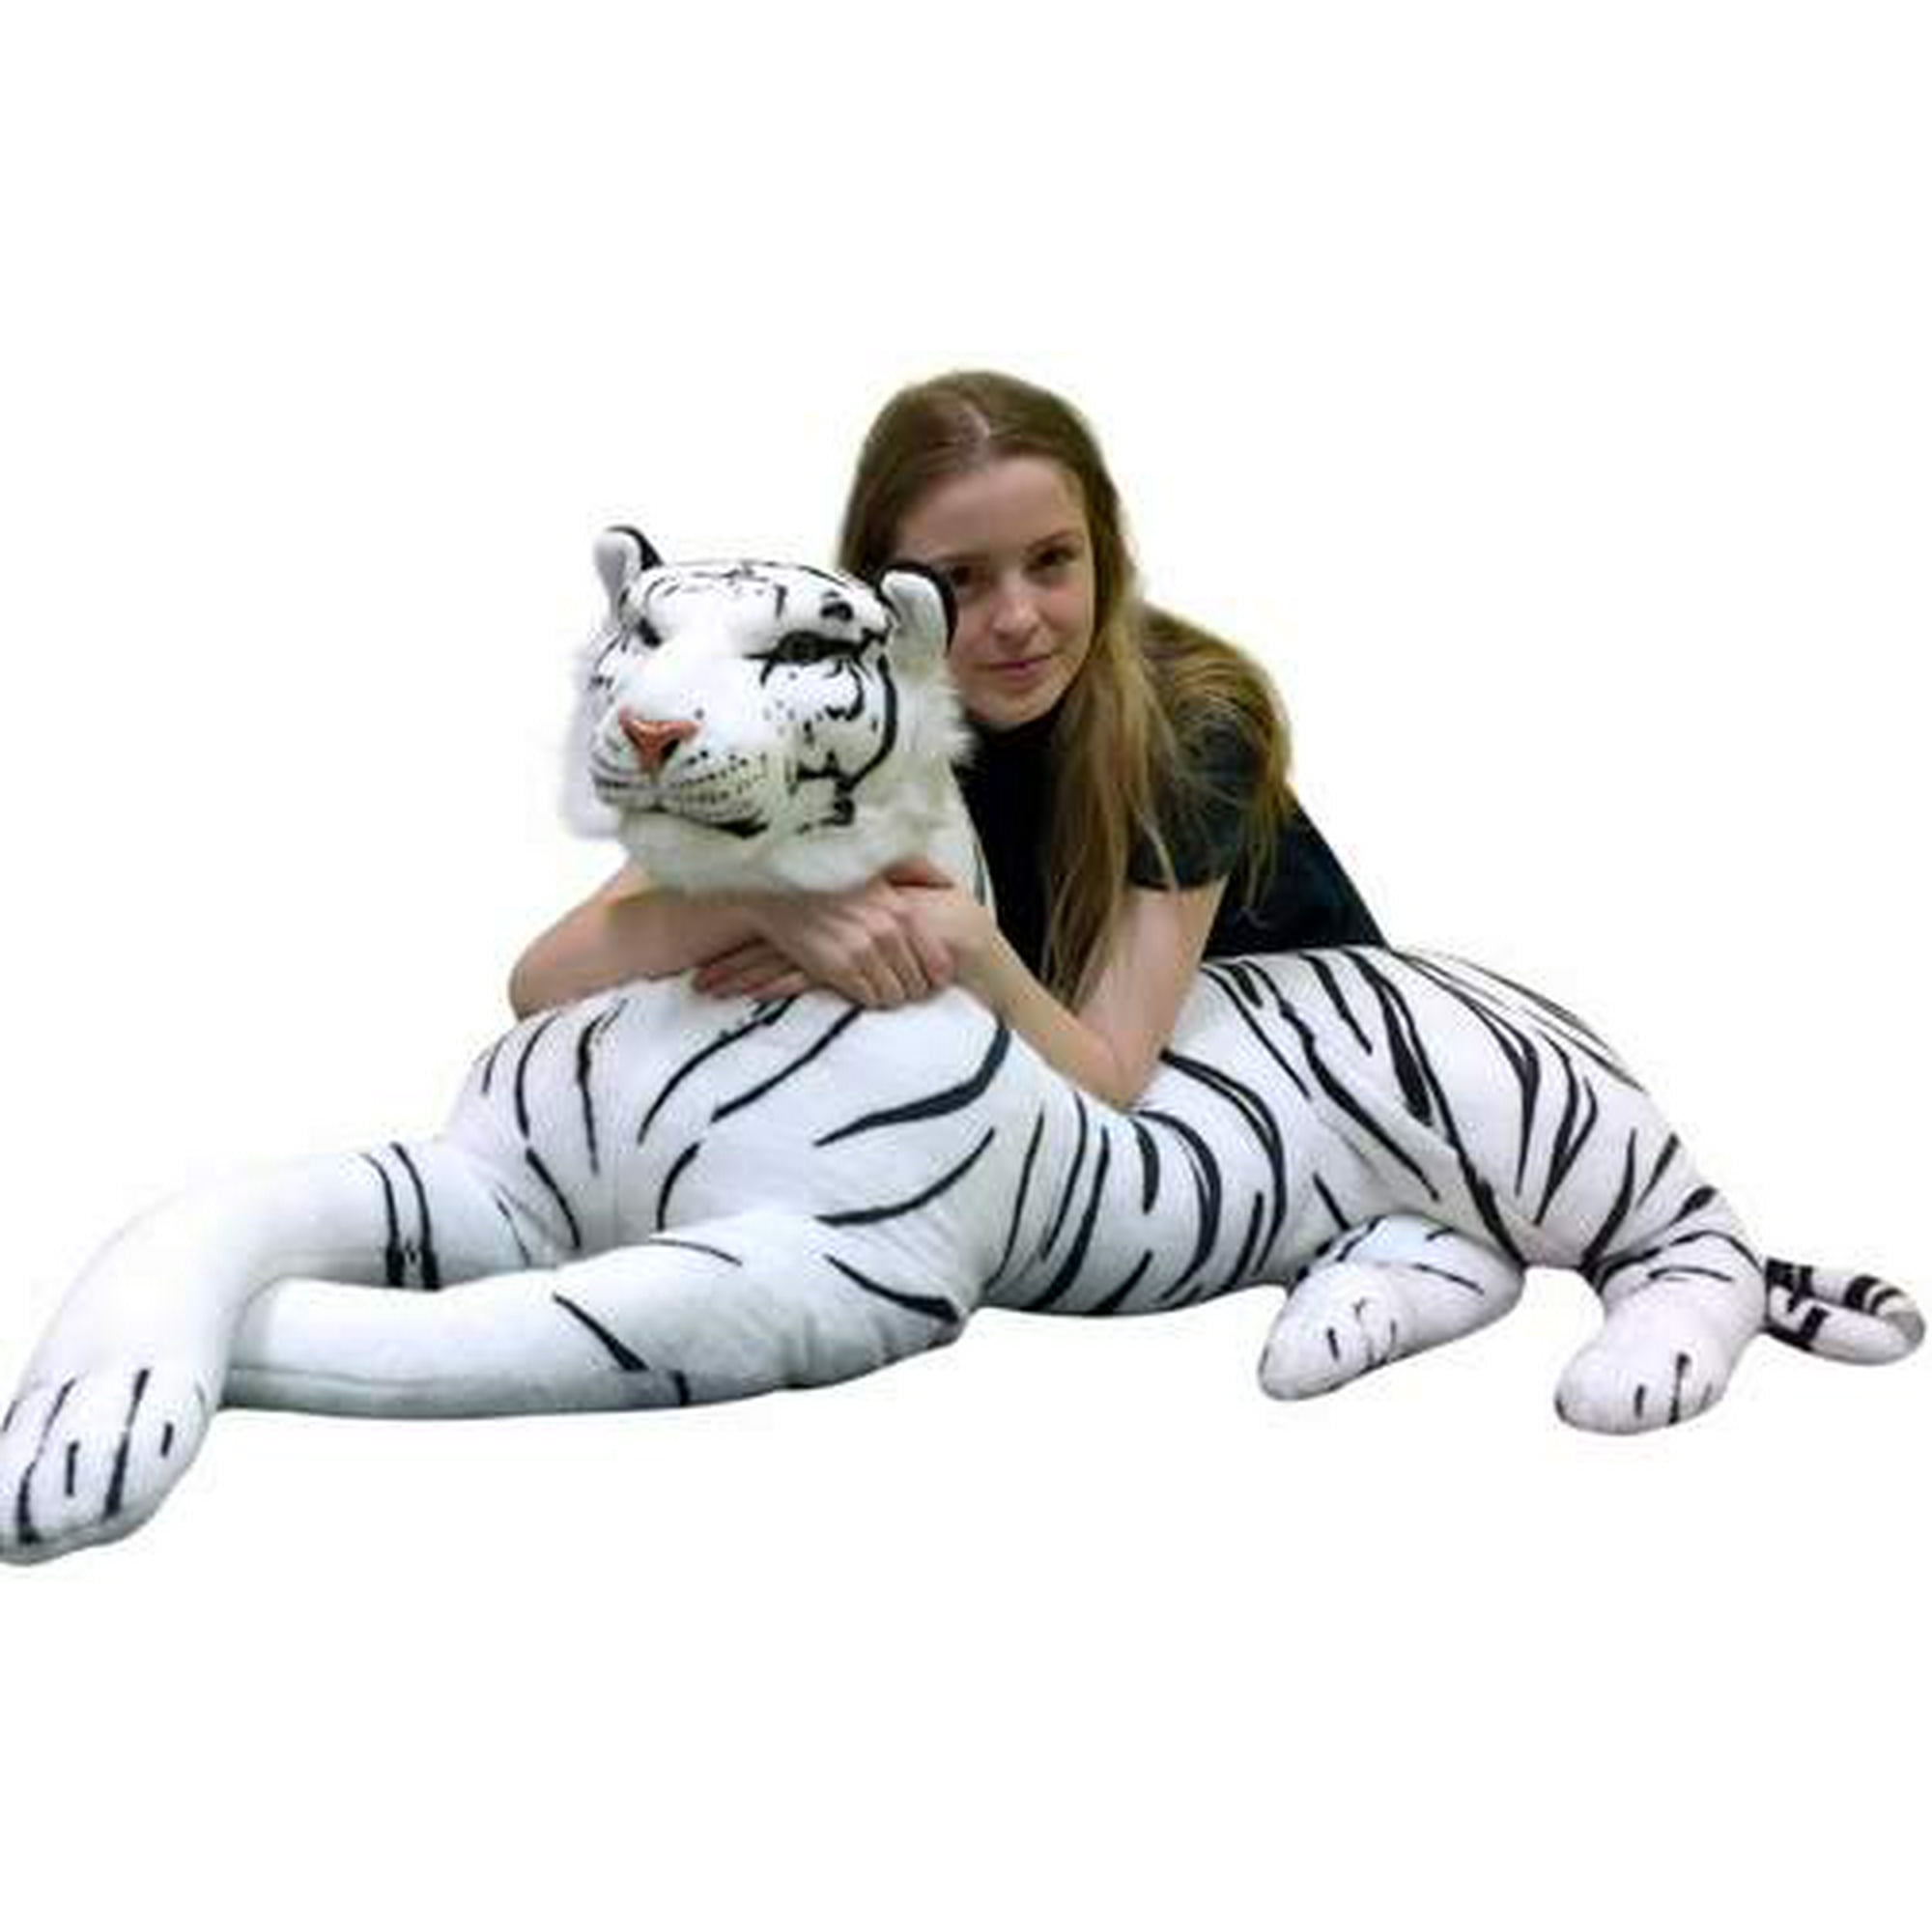 Giant Realistic Stuffed White Tiger 48 Inches Soft Extremely Realistic Big  Plush Animal | Walmart Canada